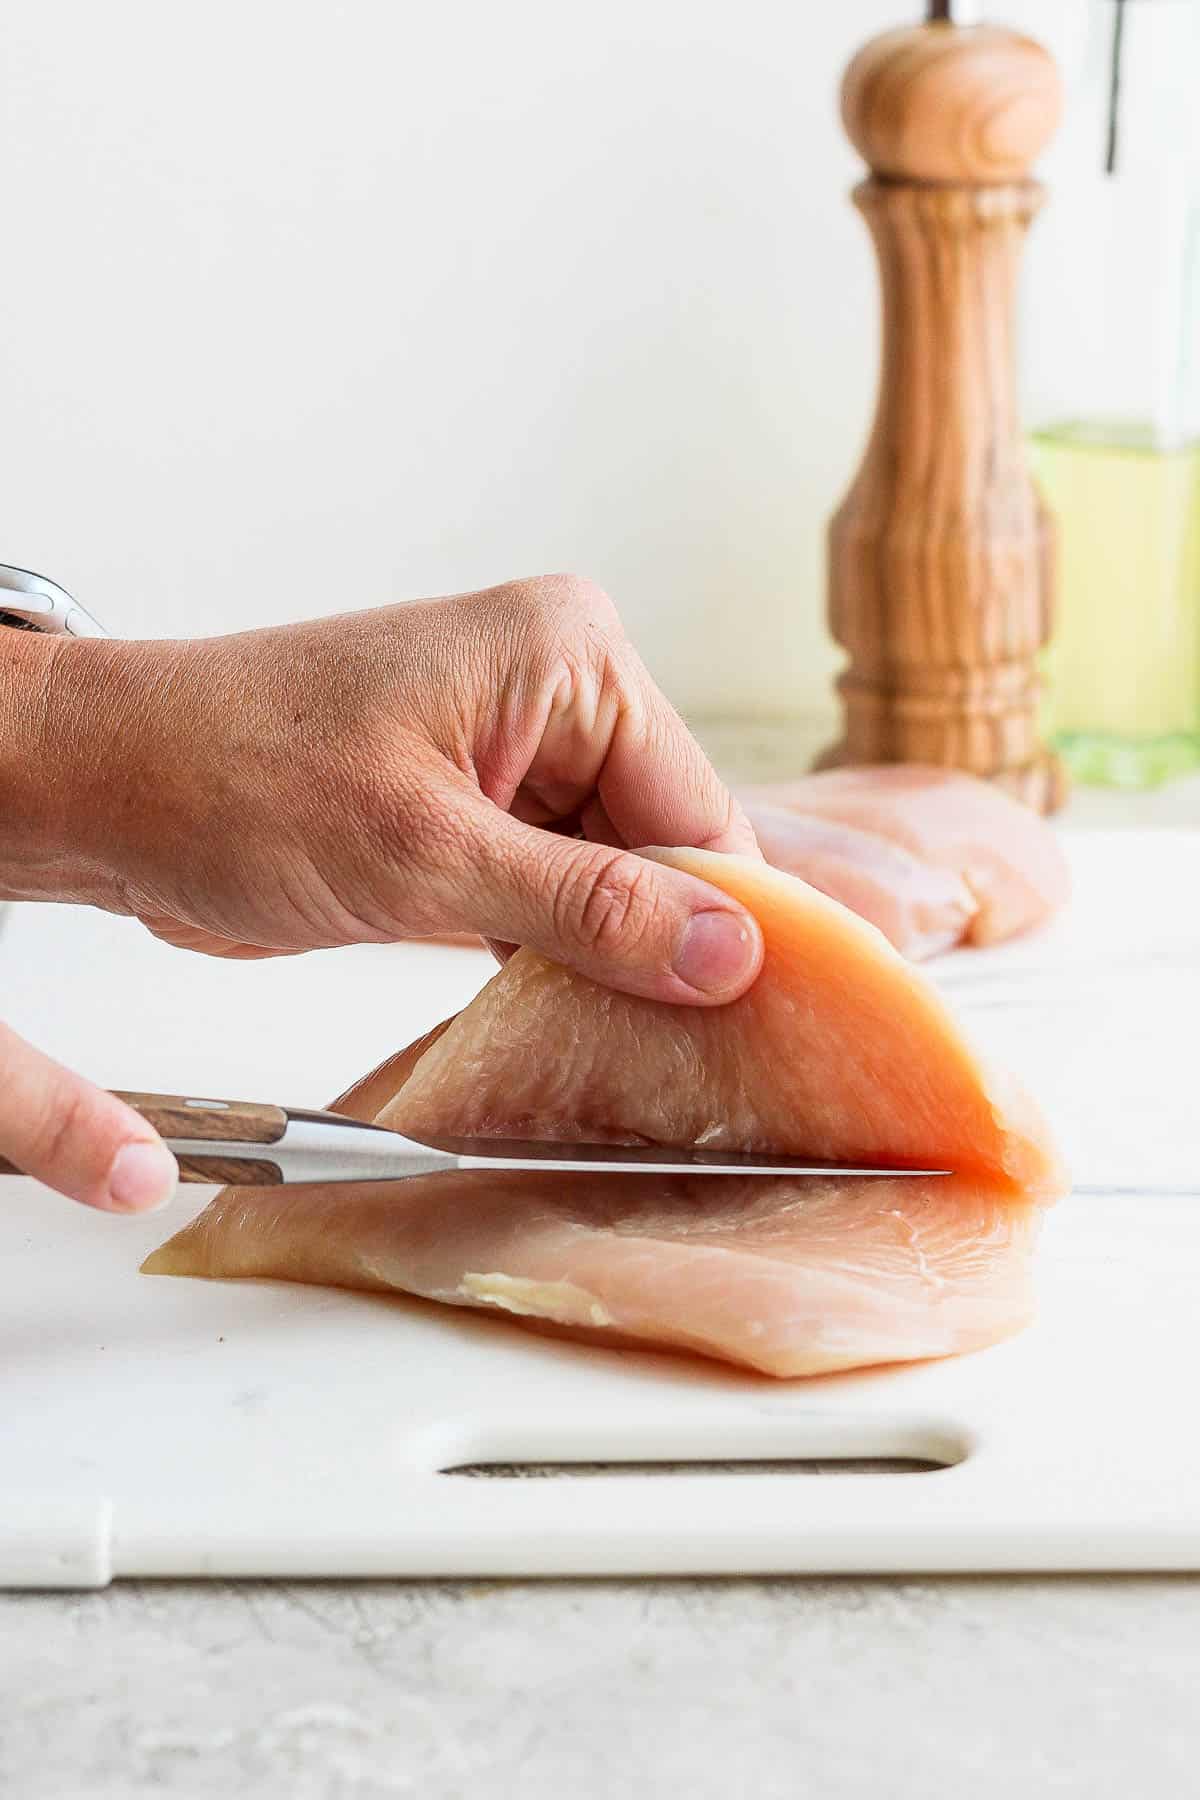 Butterflying a chicken breast by cutting it through the middle lengthwise.